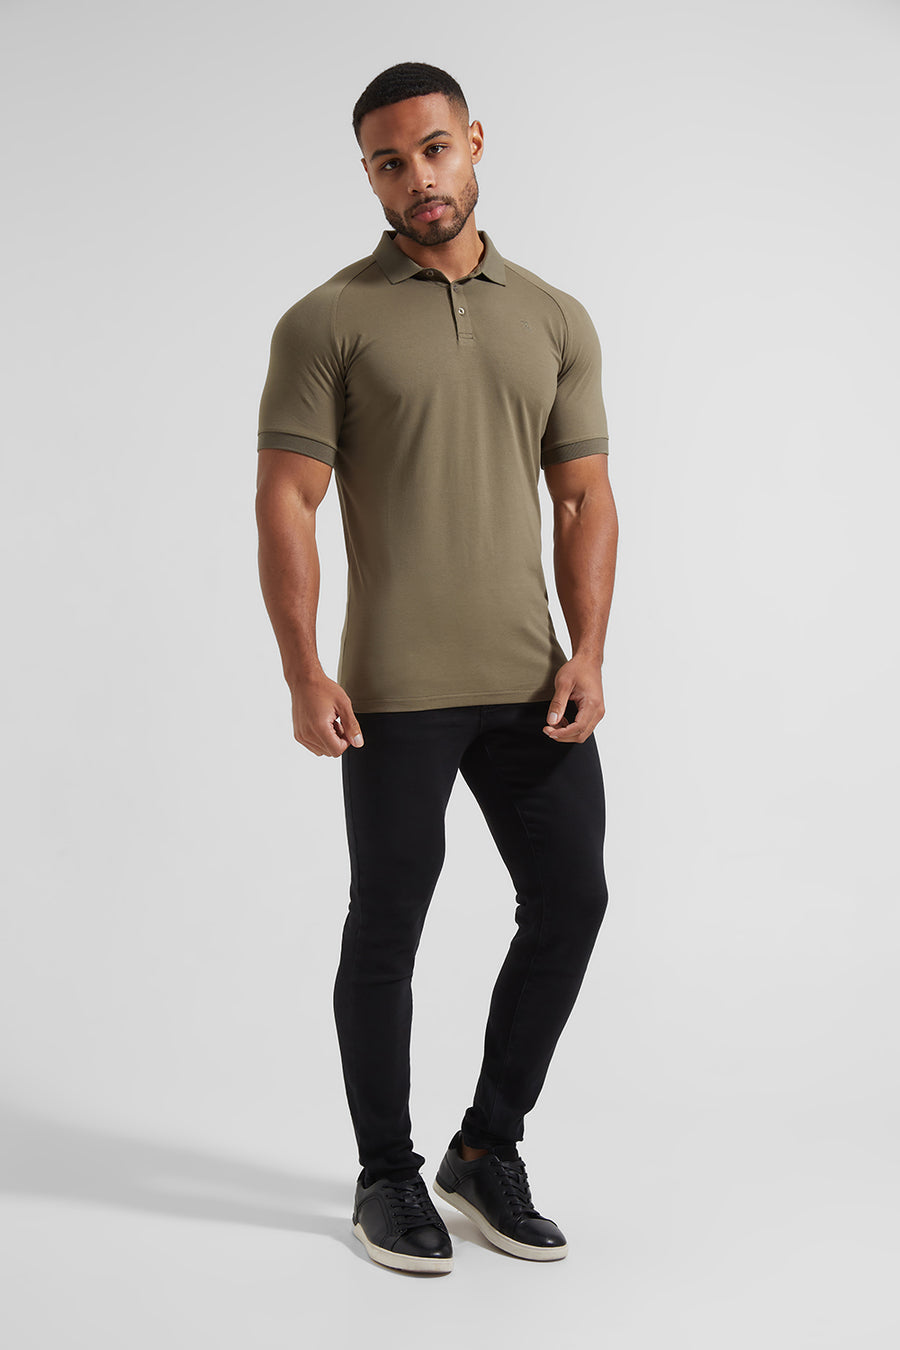 Athletic Fit Polo Shirt in Khaki - TAILORED ATHLETE - USA